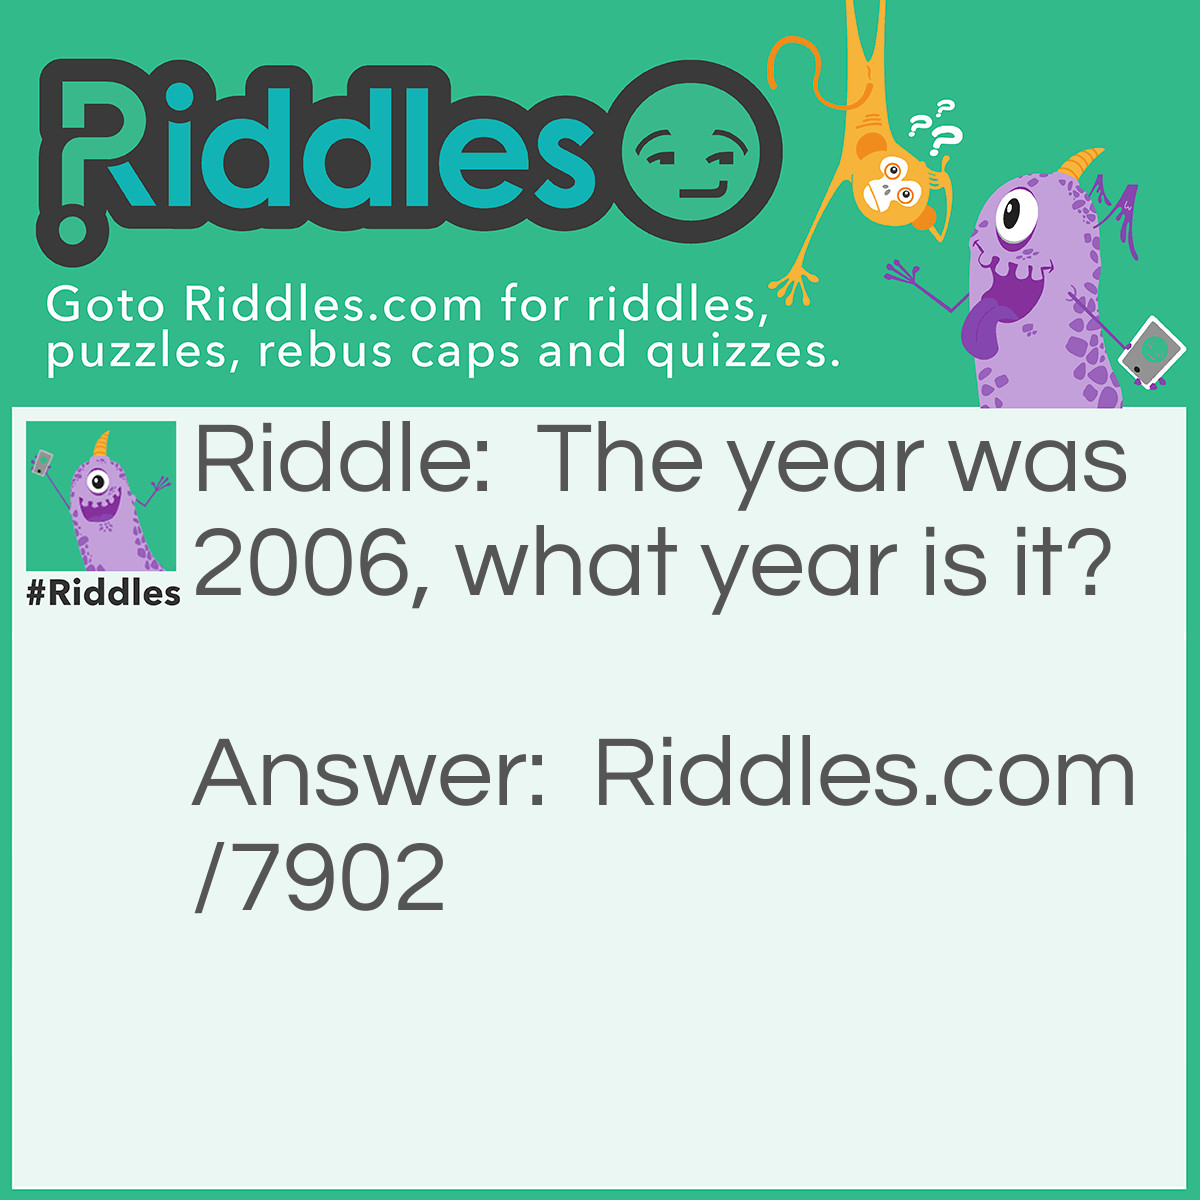 Riddle: The year was 2006, what year is it? Answer: what year it is now.